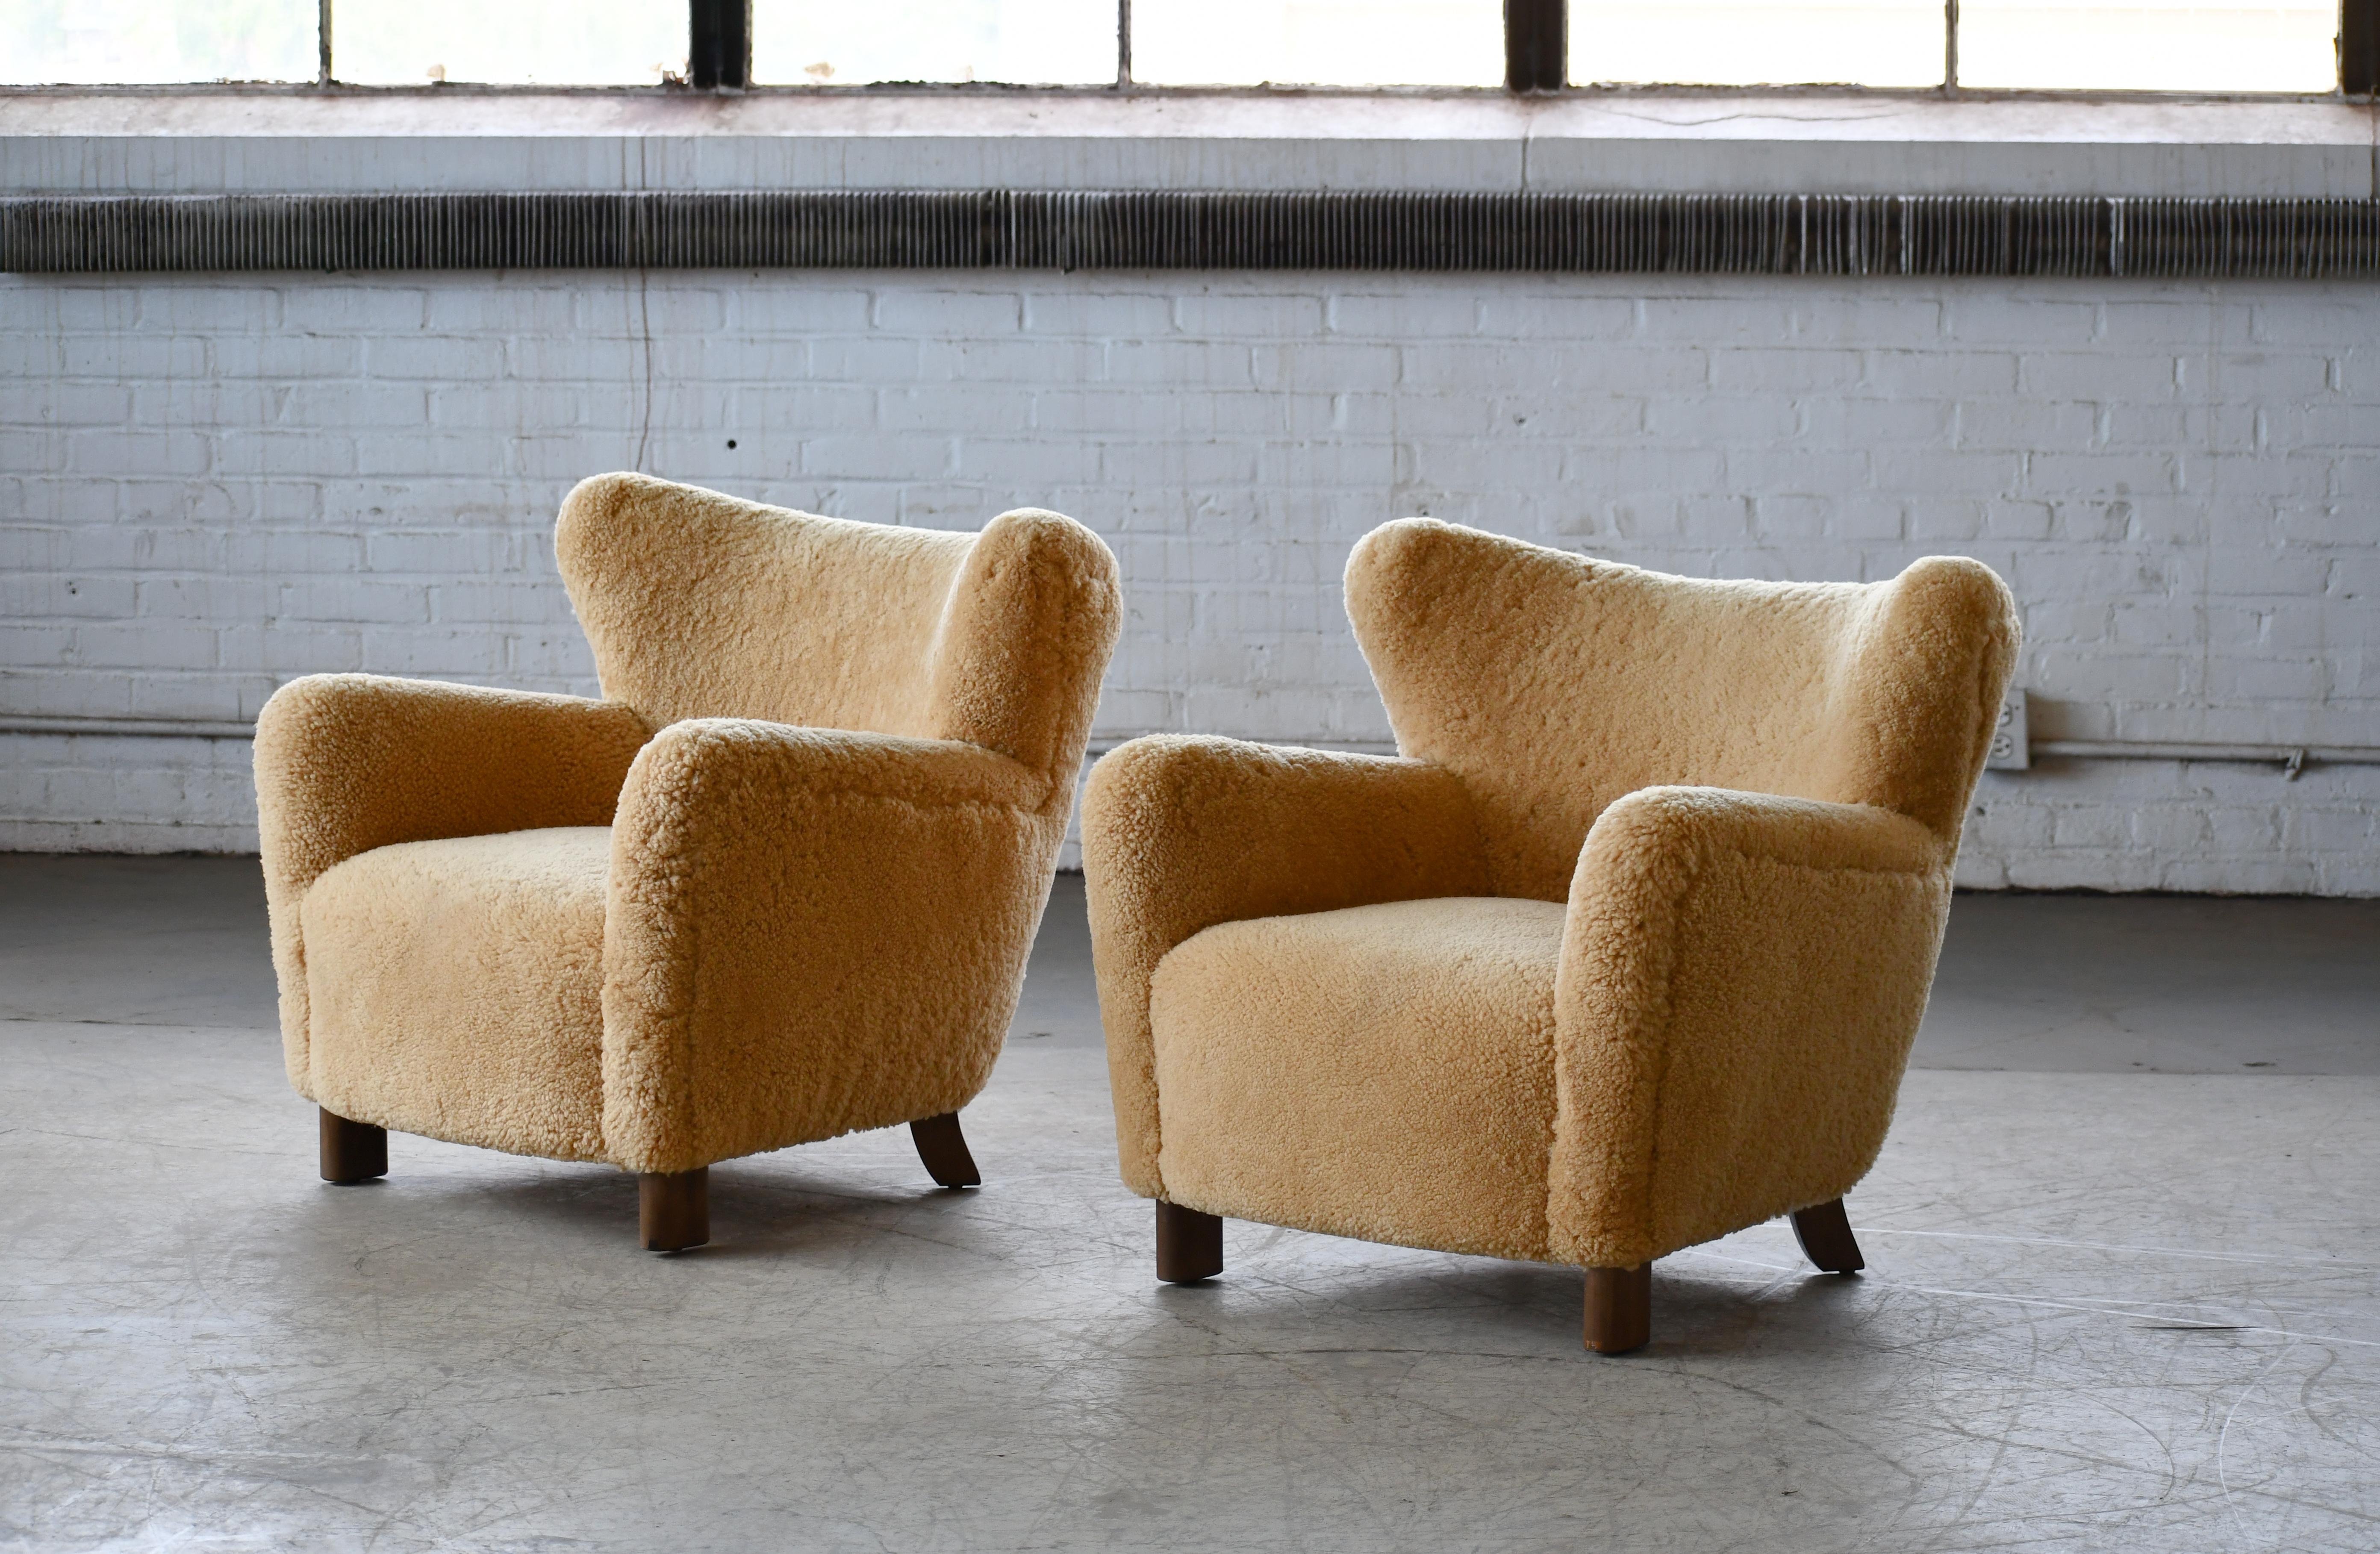 Pair of 1940's Style Classic Club or Lounge Chairs in Amber Color Shearling In New Condition For Sale In Bridgeport, CT